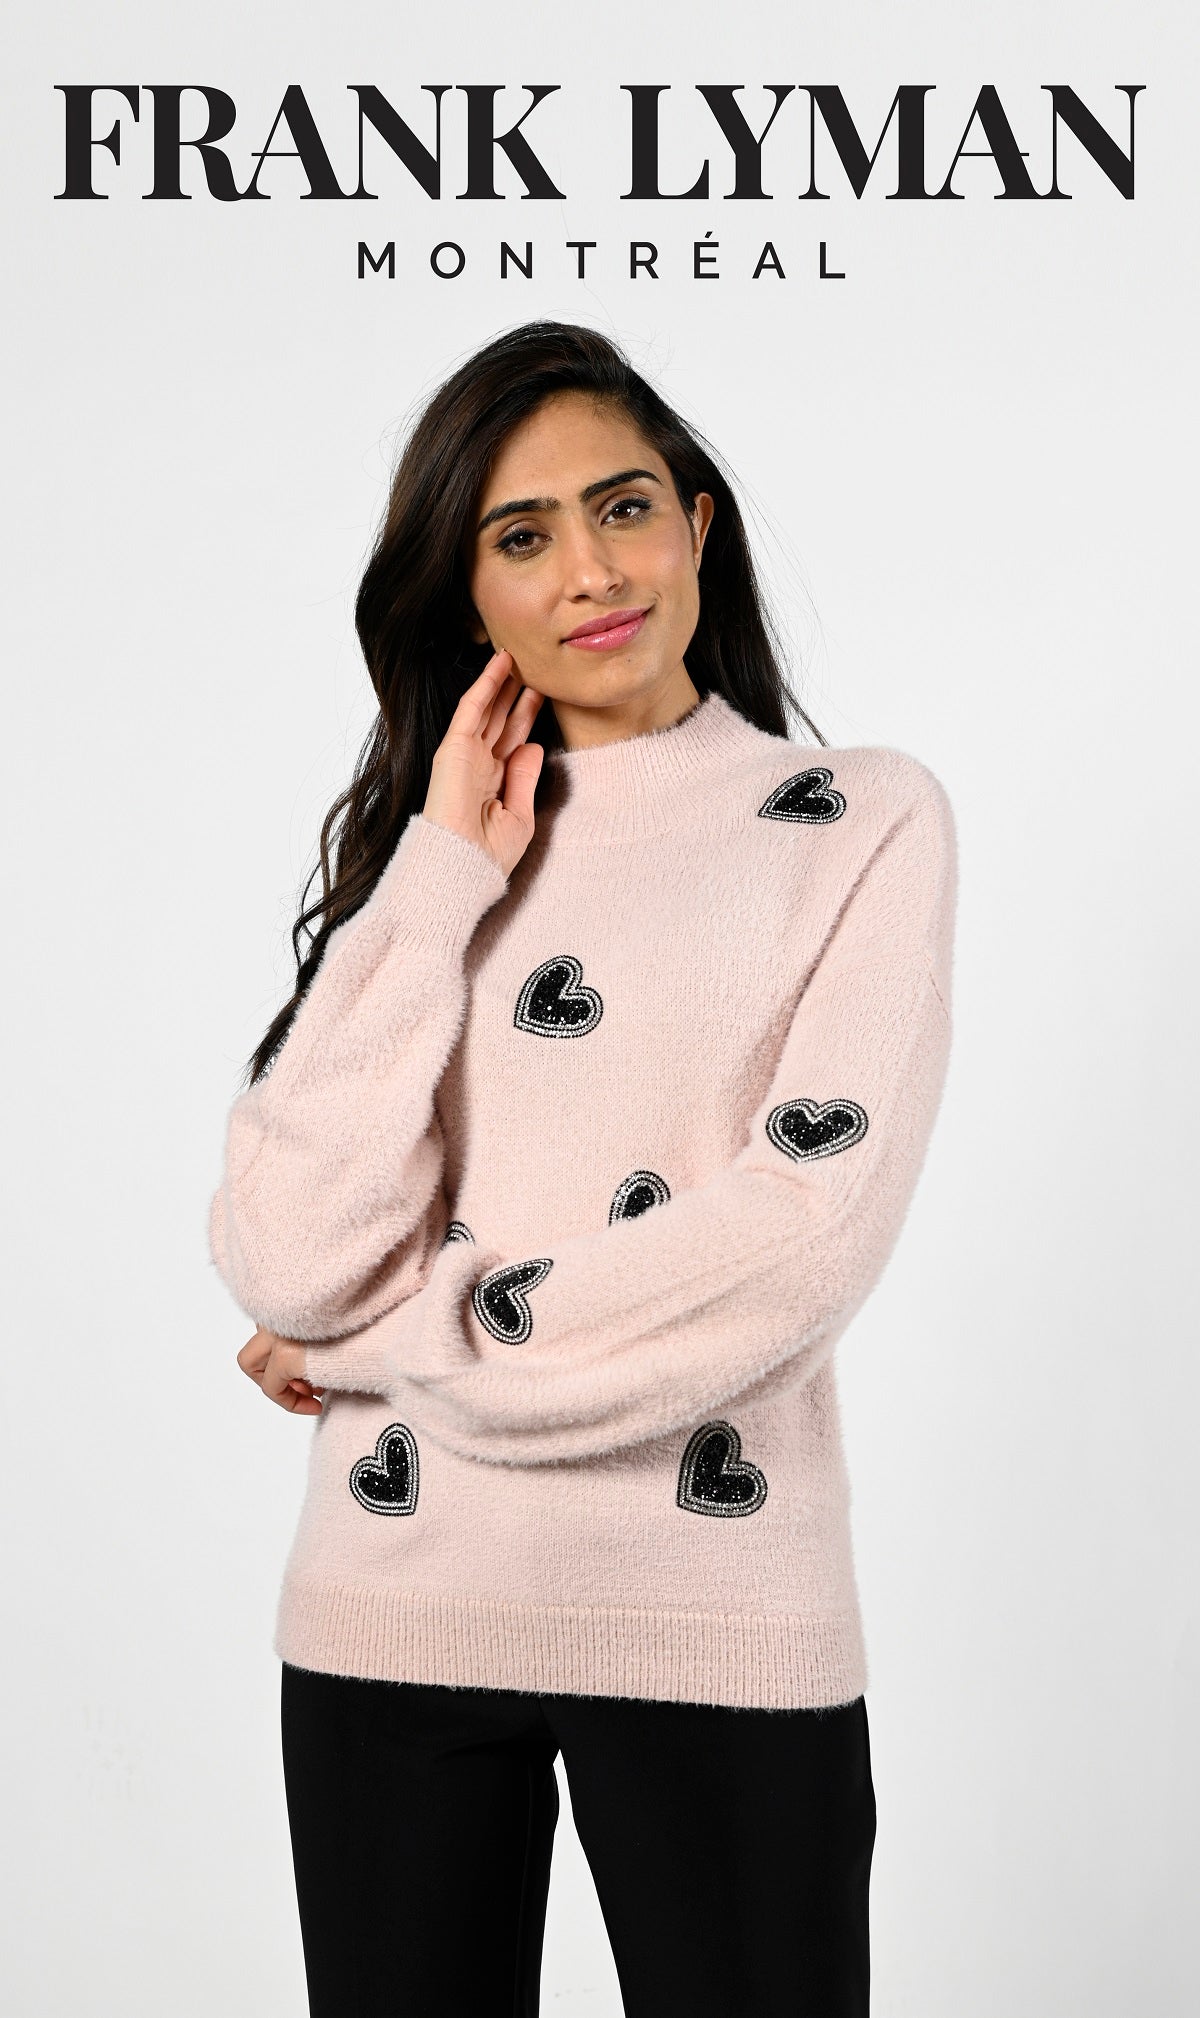 Frank Lyman Montreal Sweaters-Buy Frank Lyman Montreal Sweaters Online-Women's Sweaters-Frank Lyman Montreal Fall 2022 Collection